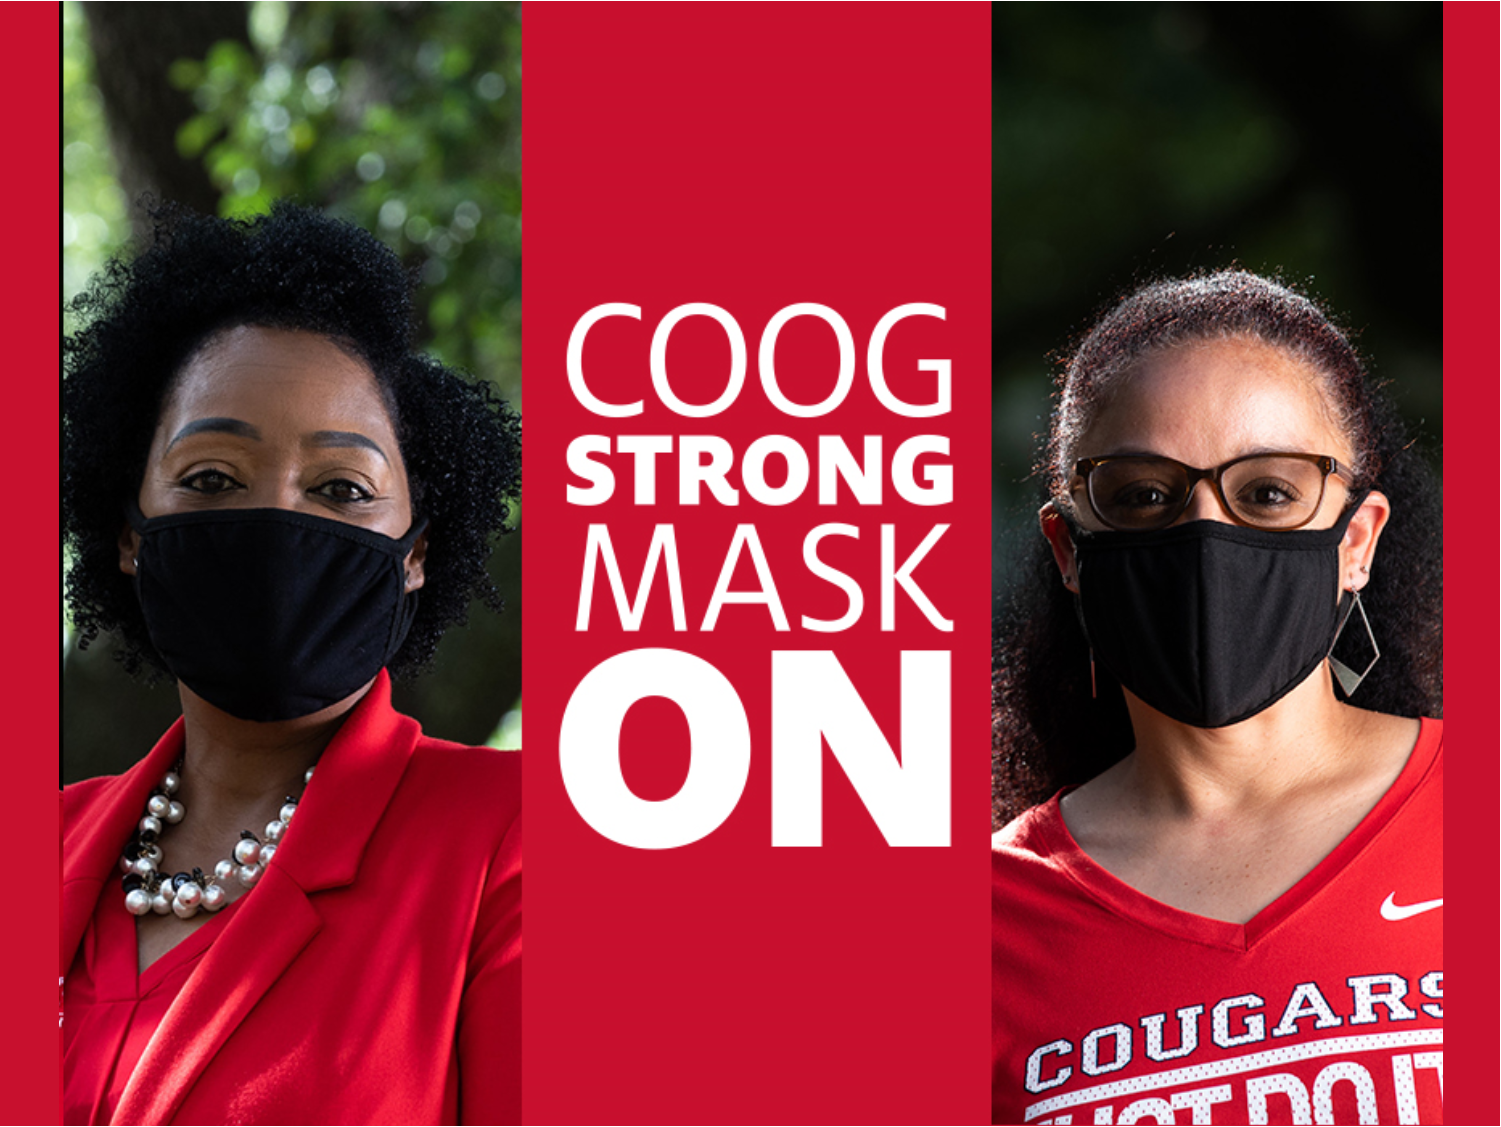 Mask On. Together, we are Coog Strong.